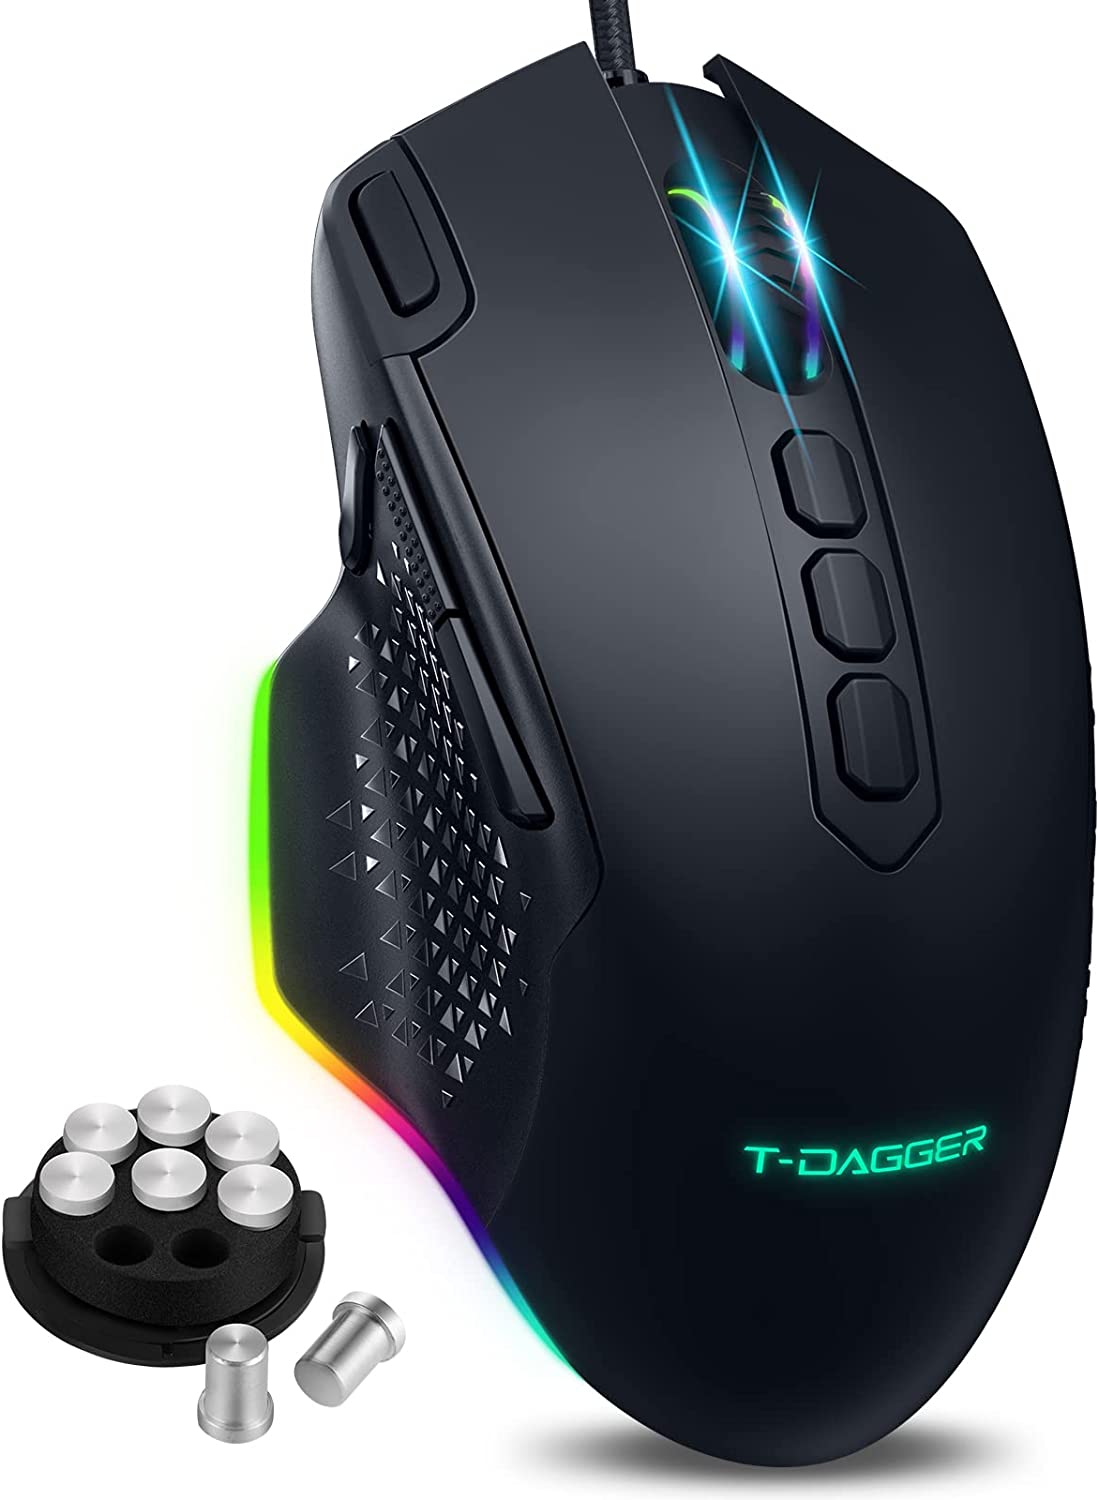 RTS gamers should look for a gaming mouse that is suitable for a claw grip and that has adaptable weight.